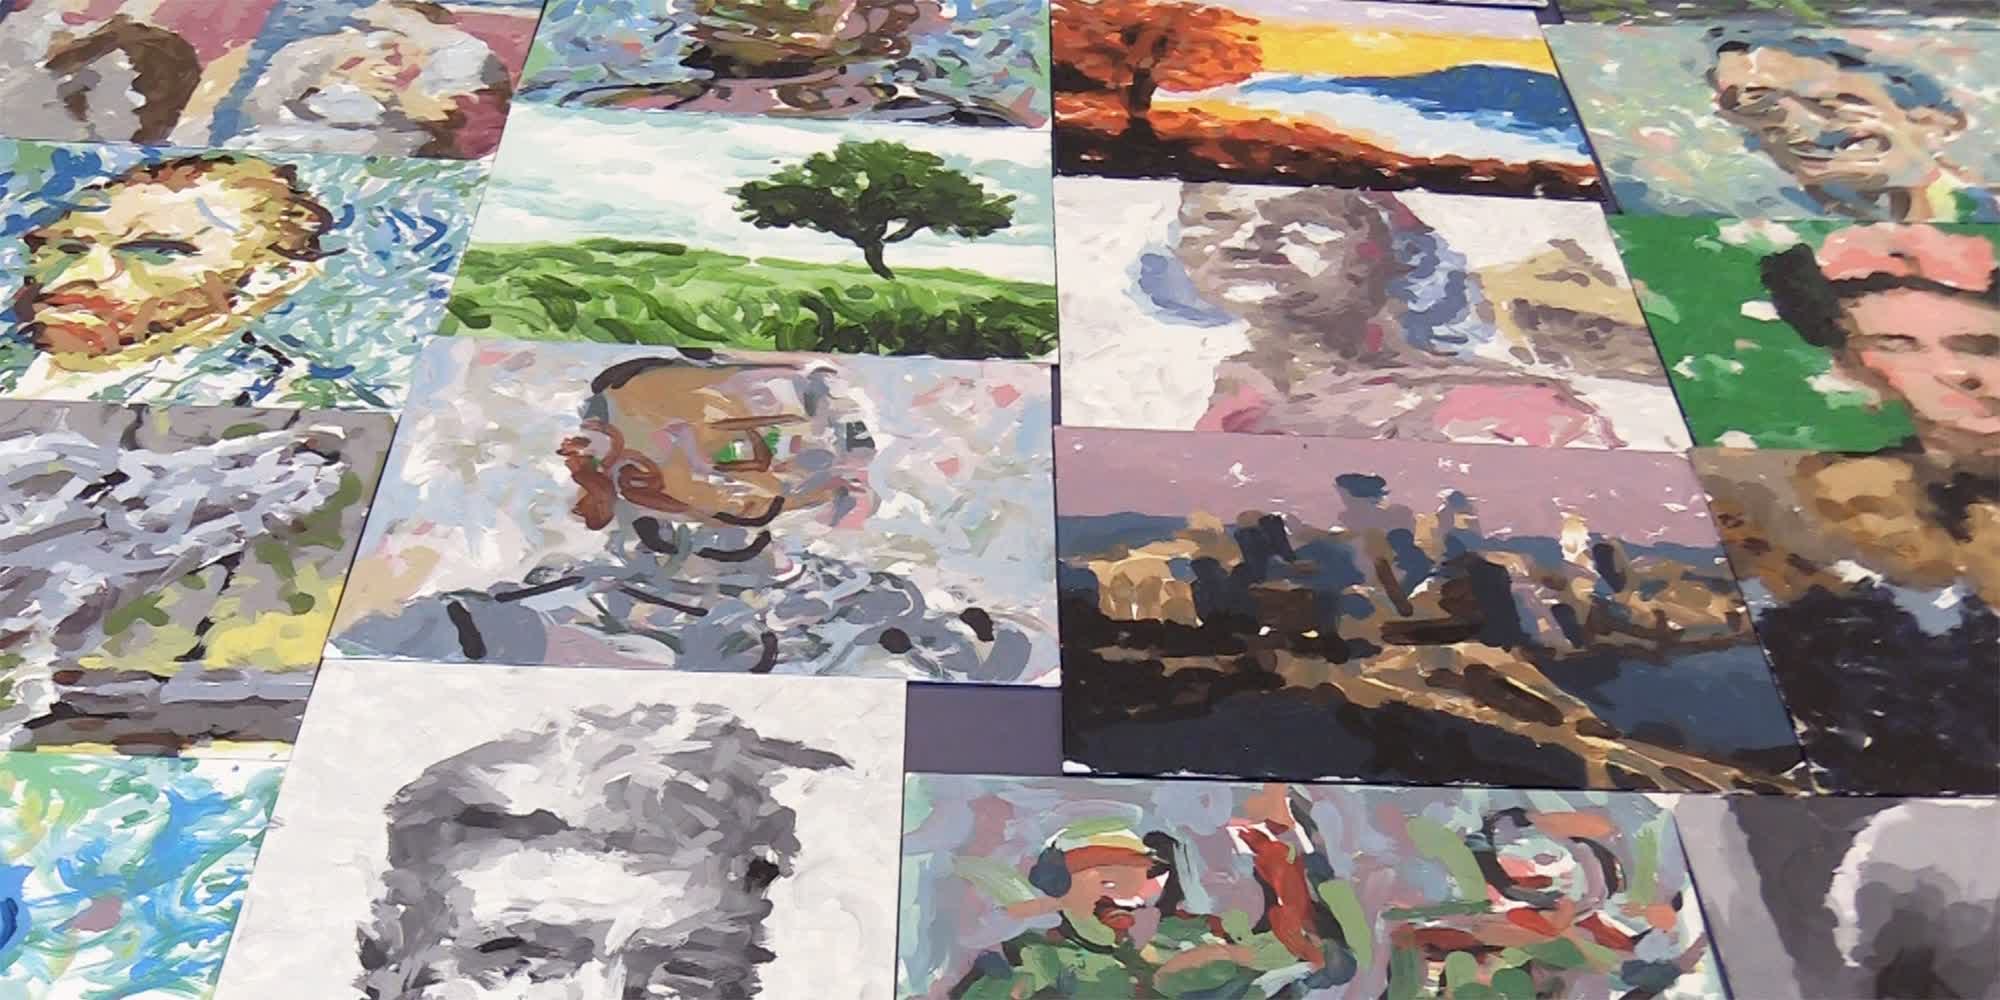 Carnegie Mellon engineers made an AI-powered robot that manually paints pictures from text, audio, and visual prompts